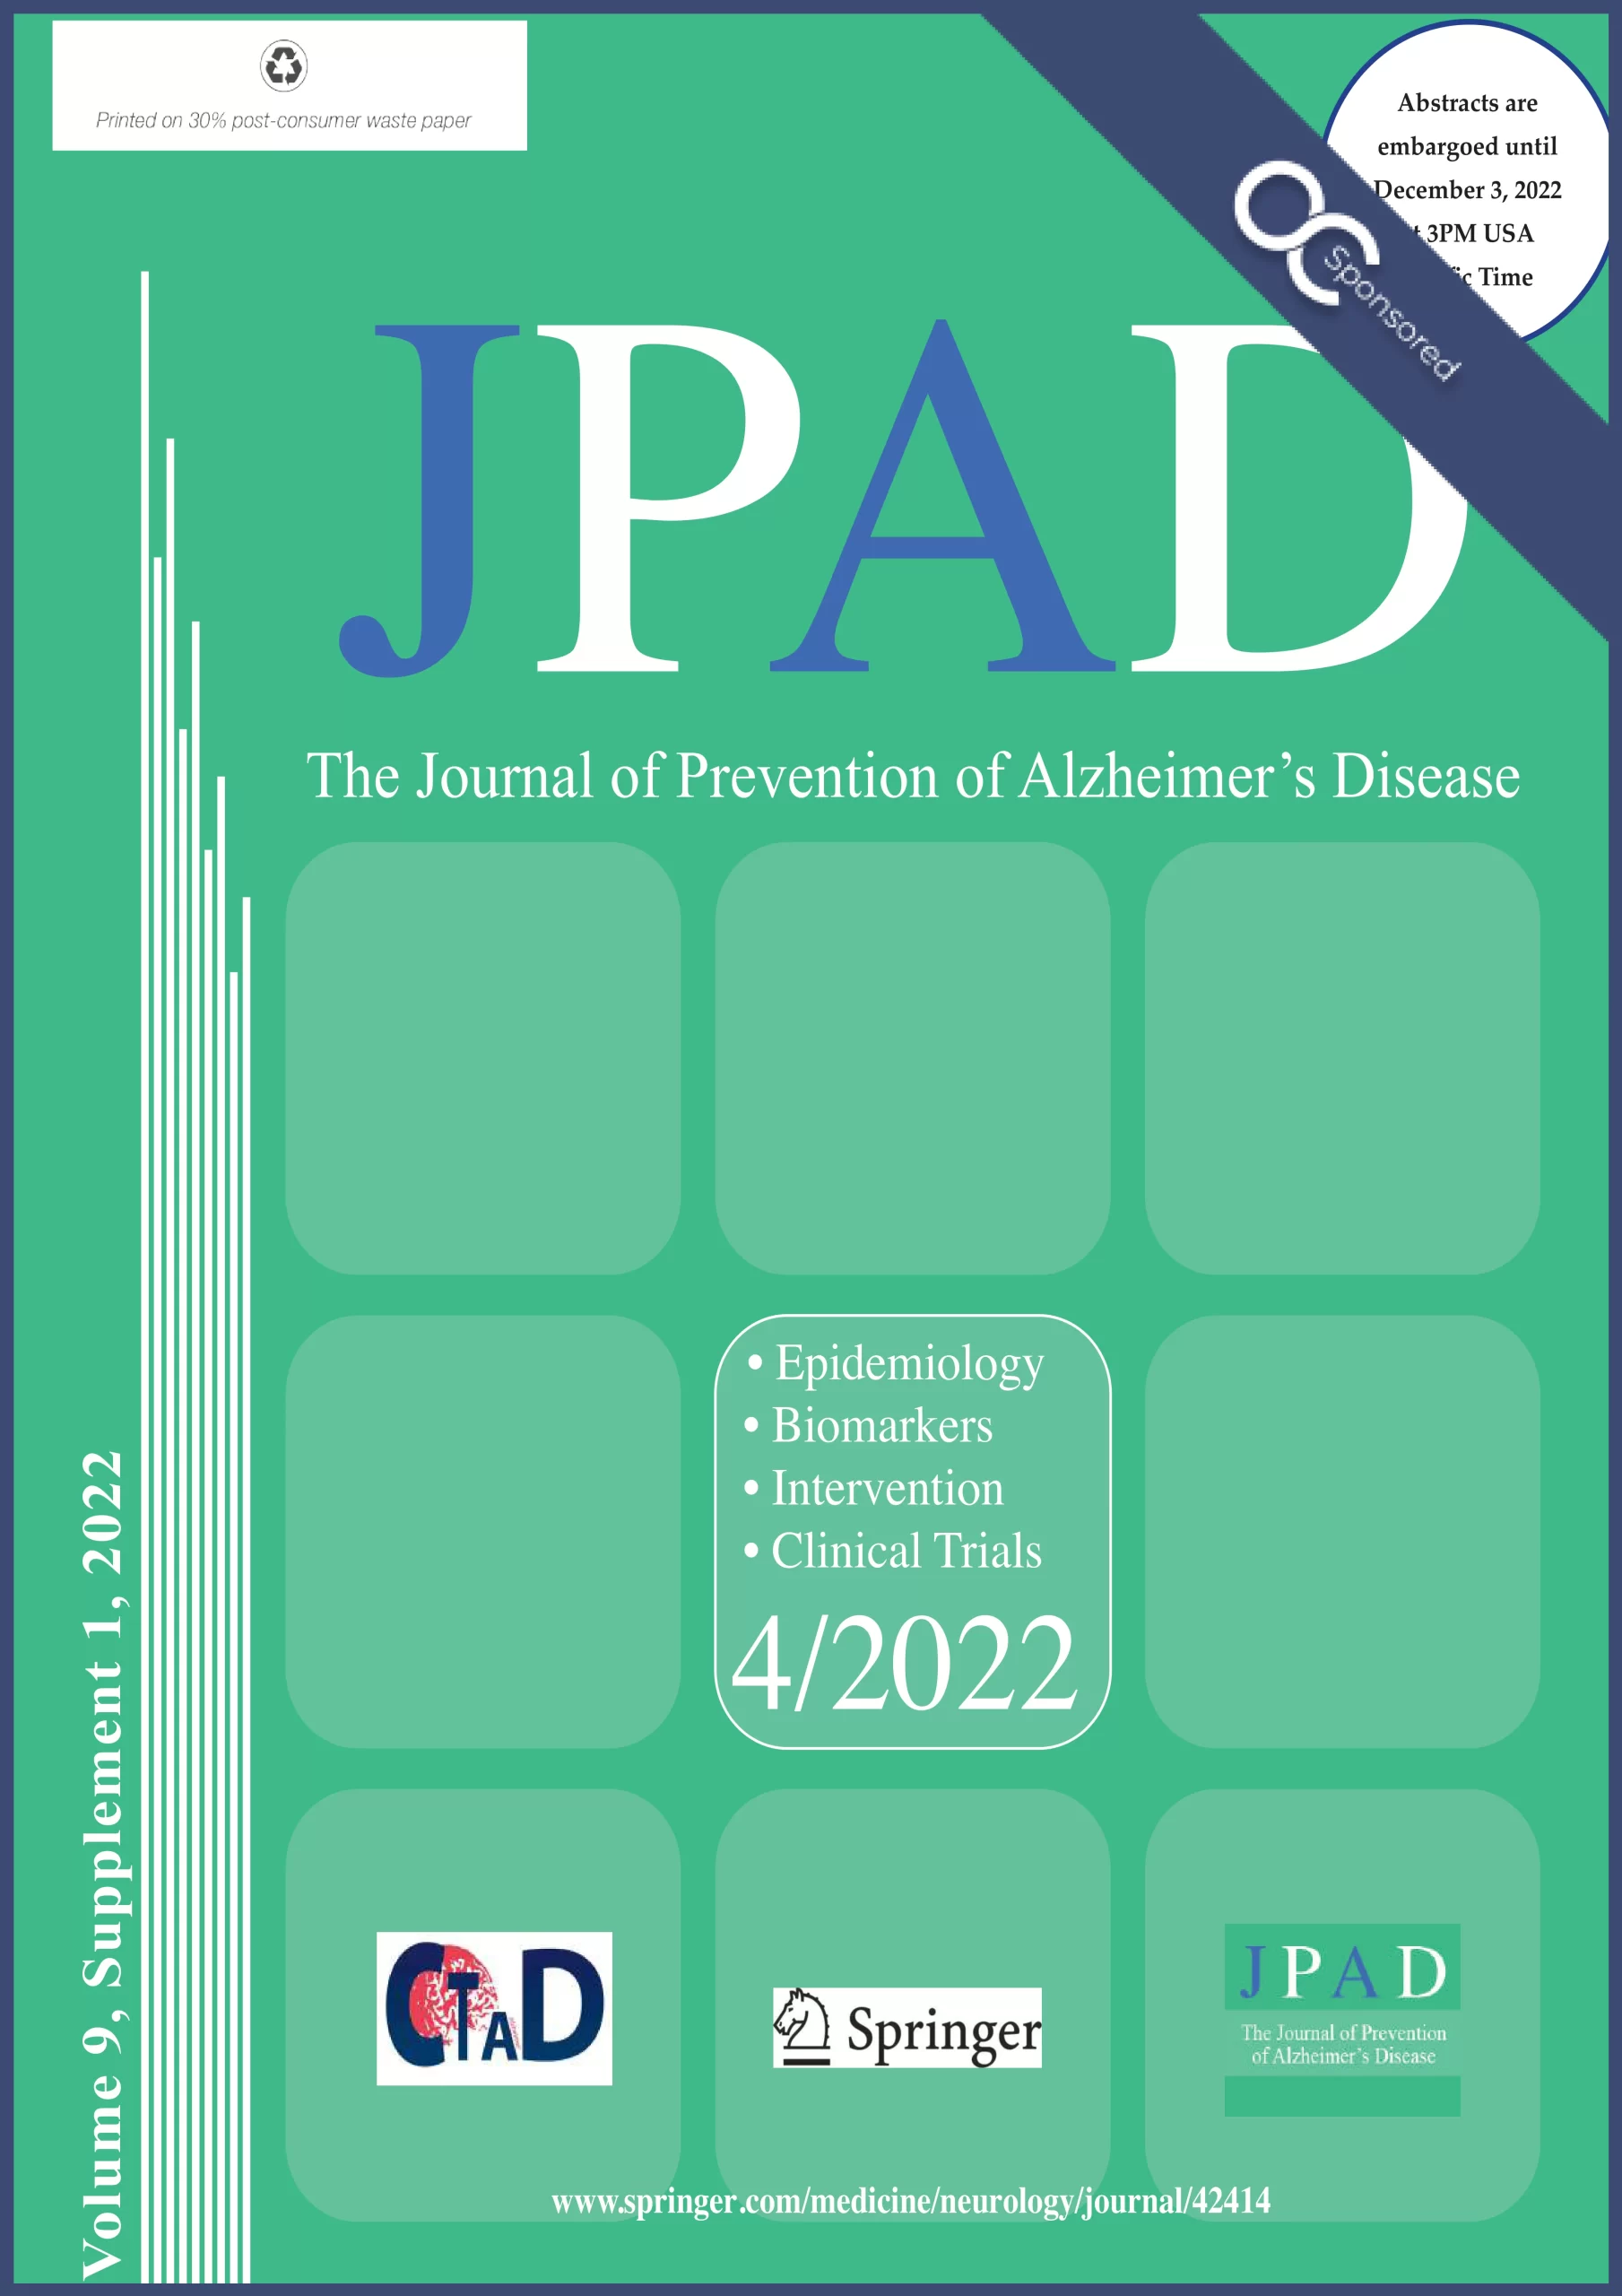 The journal of prevention of Alzheimer's Disease sponsored by Optoceutics